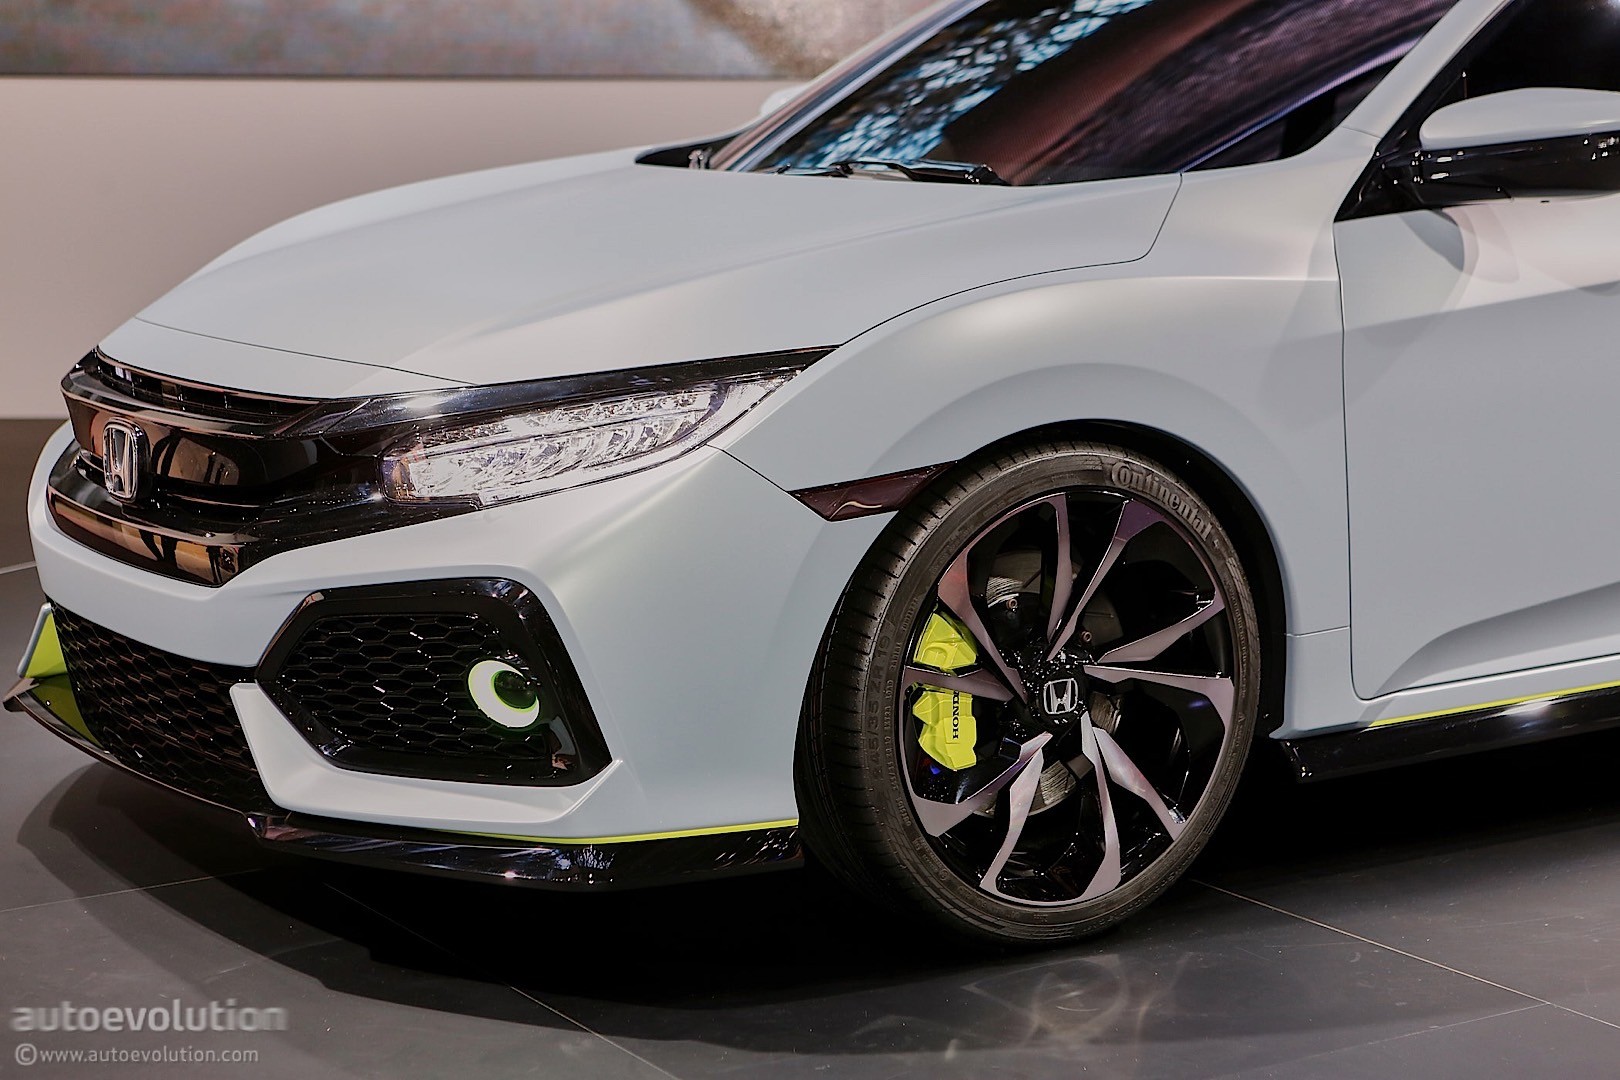 honda-civic-hatchback-coming-to-new-york-civic-si-and-new-type-r-in-2017_13.jpg